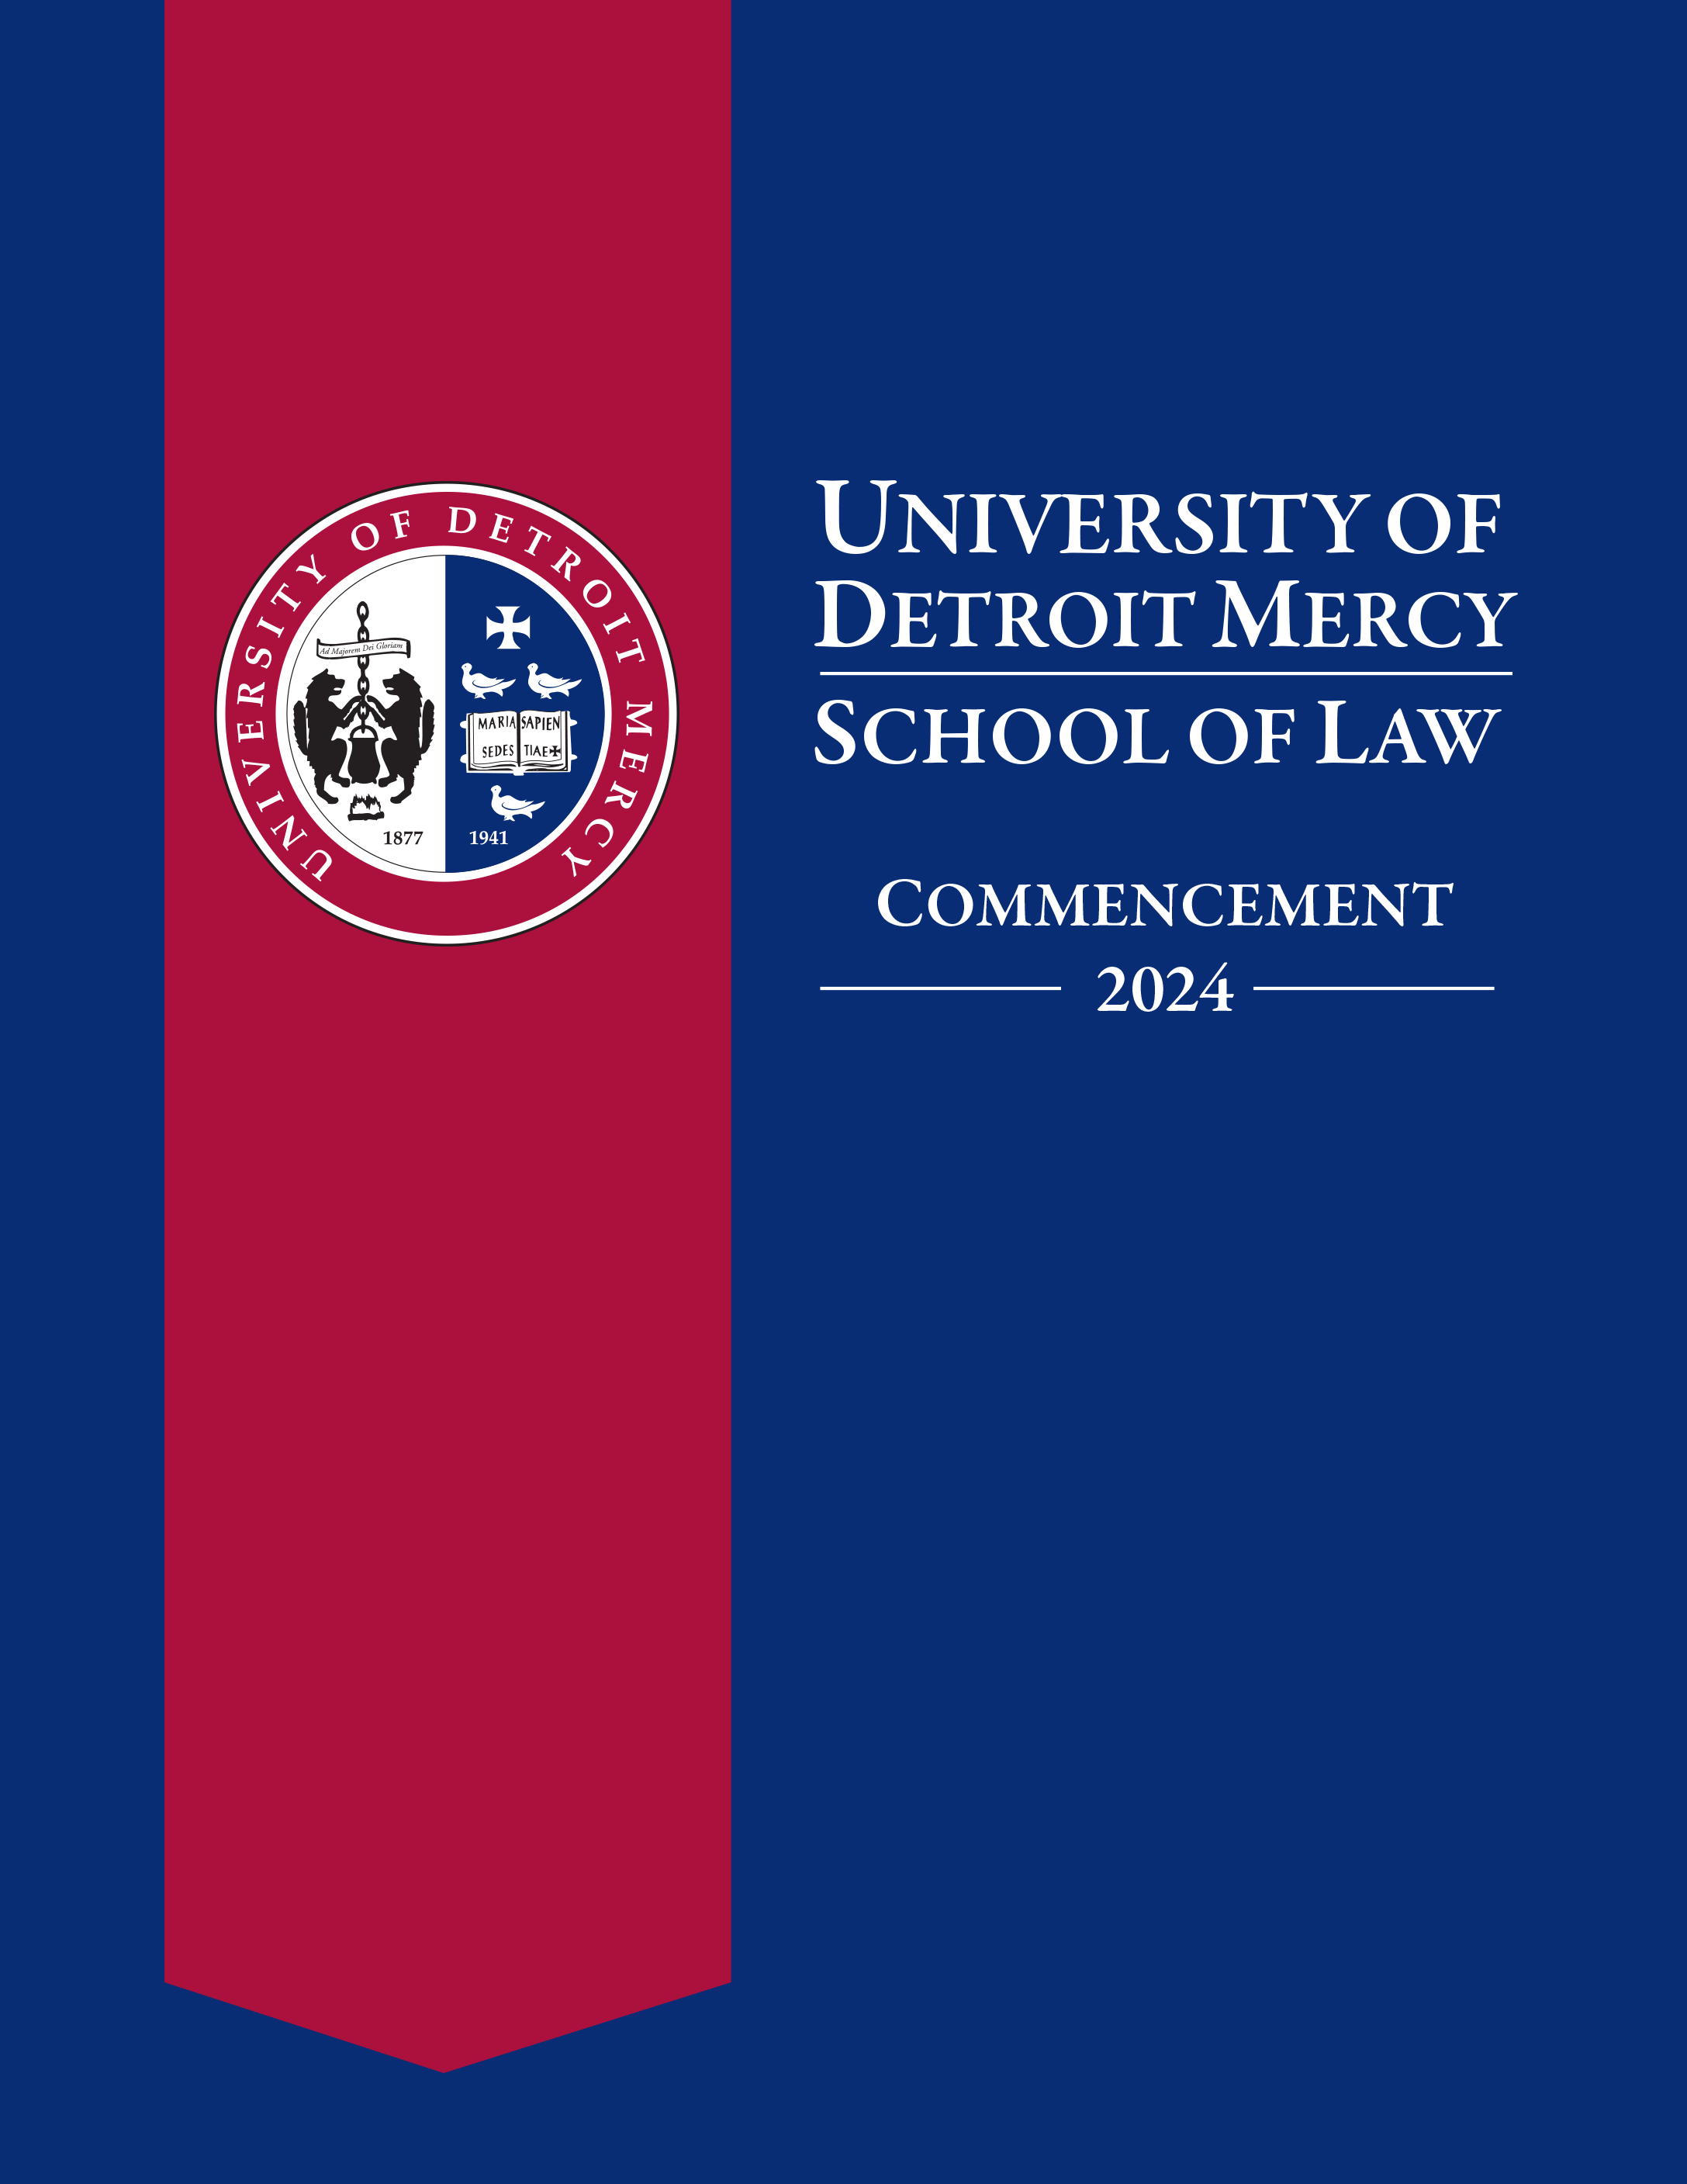 University of ɫۺϾþ Mercy Law 2024 Commencement program featuring the UDM crest on a red and blue cover.